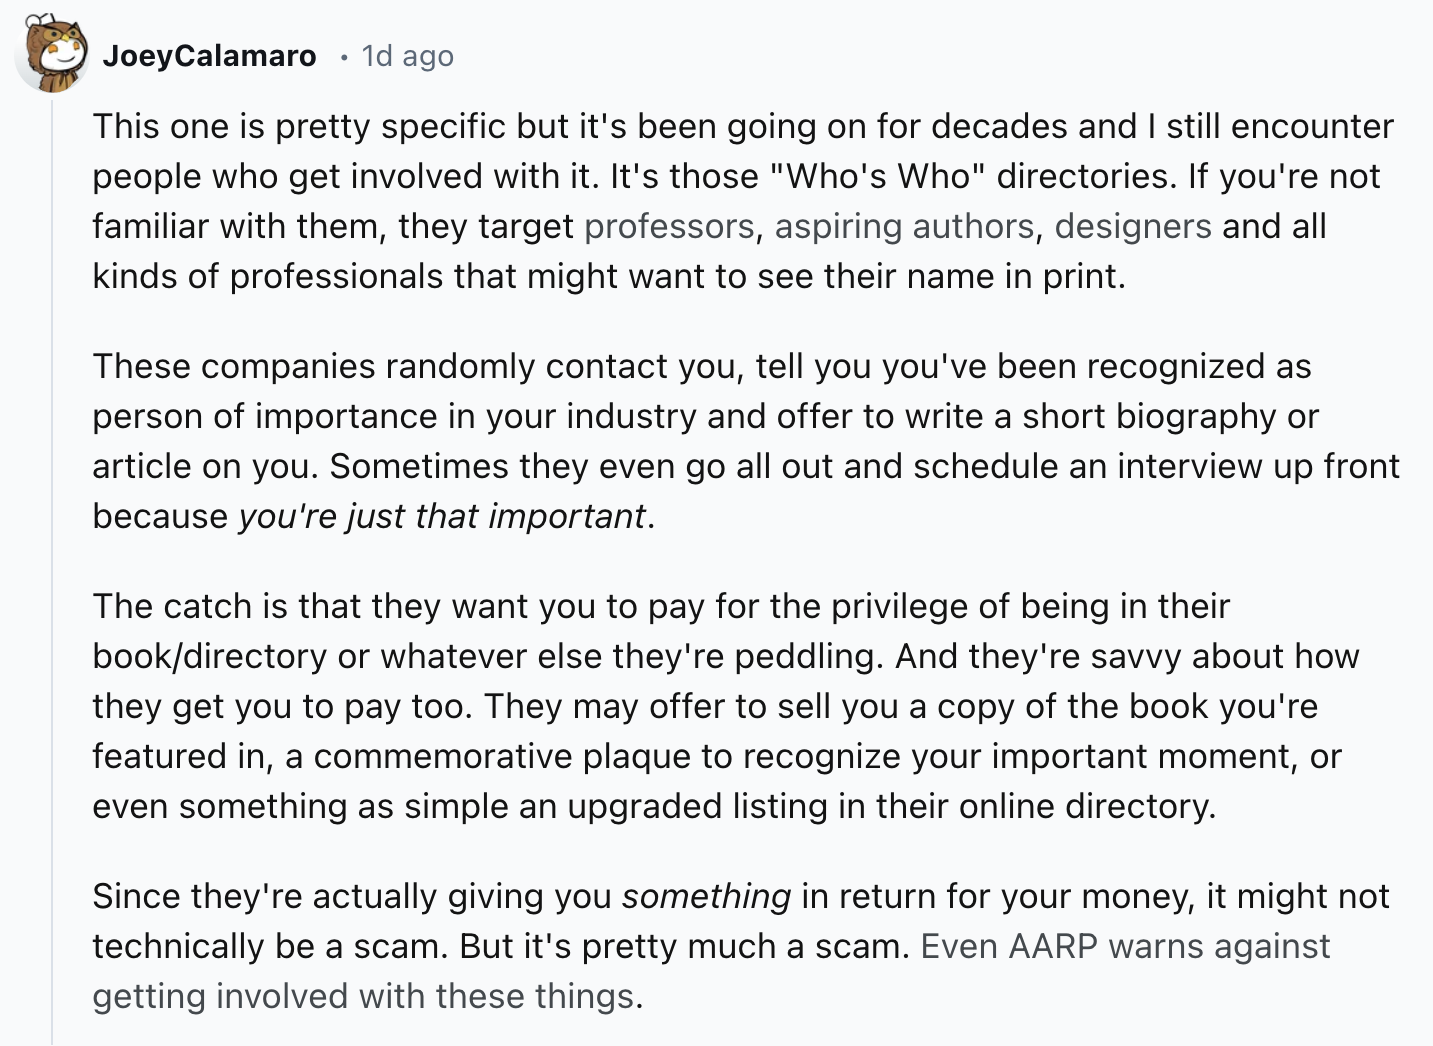 document - JoeyCalamaro 1d ago This one is pretty specific but it's been going on for decades and I still encounter people who get involved with it. It's those "Who's Who" directories. If you're not familiar with them, they target professors, aspiring aut